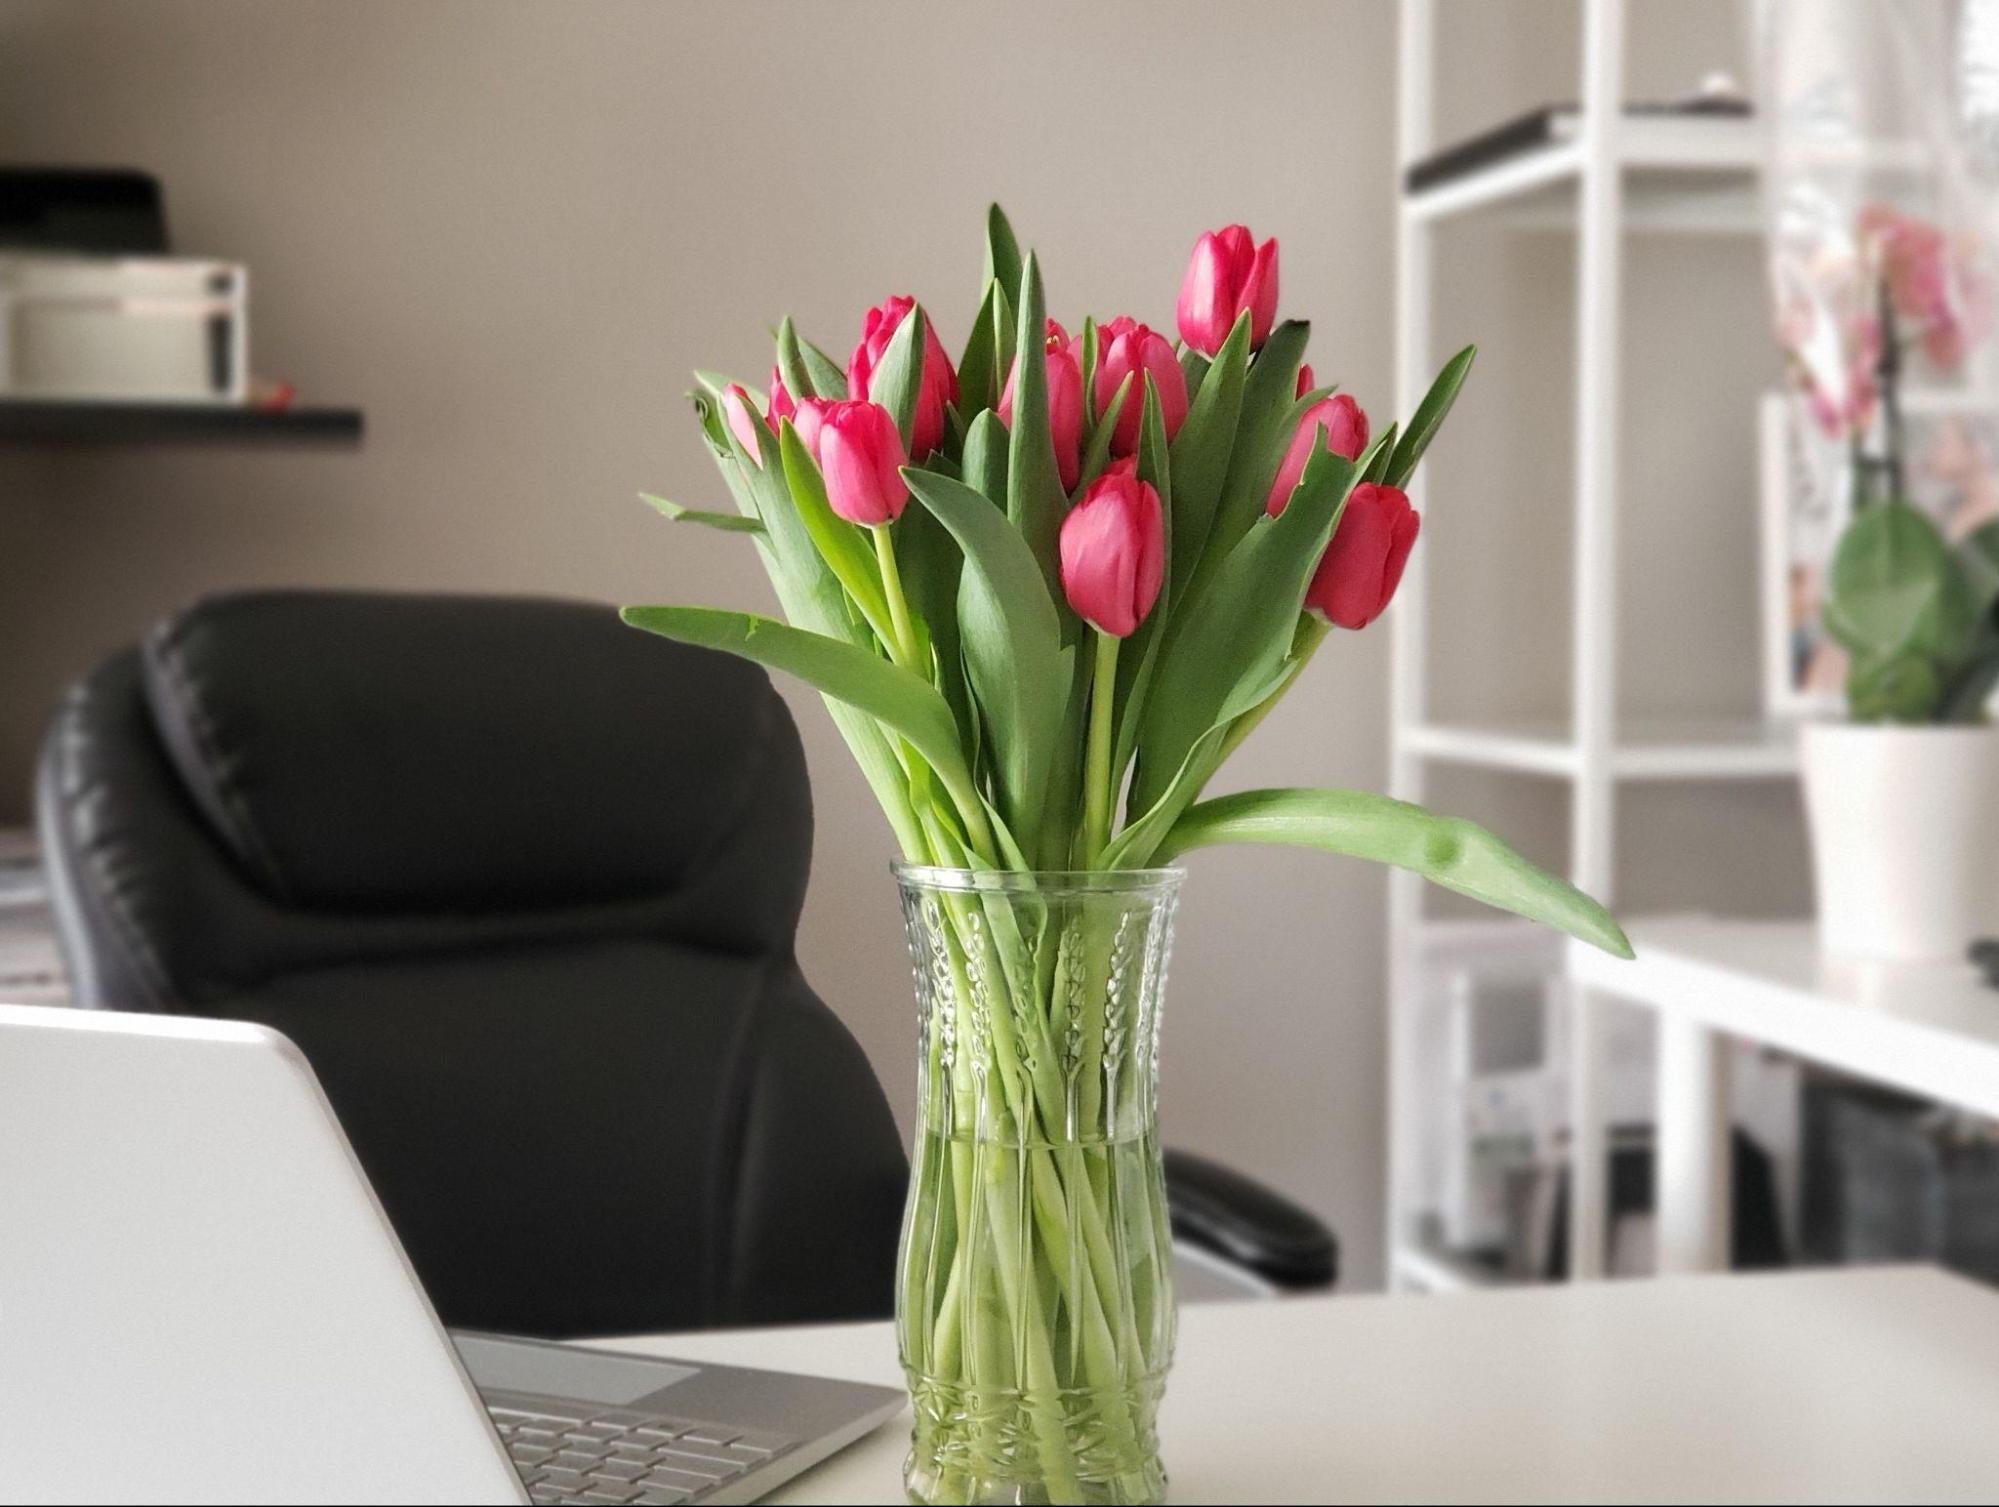 The Impact of Flowers on Corporate Environments